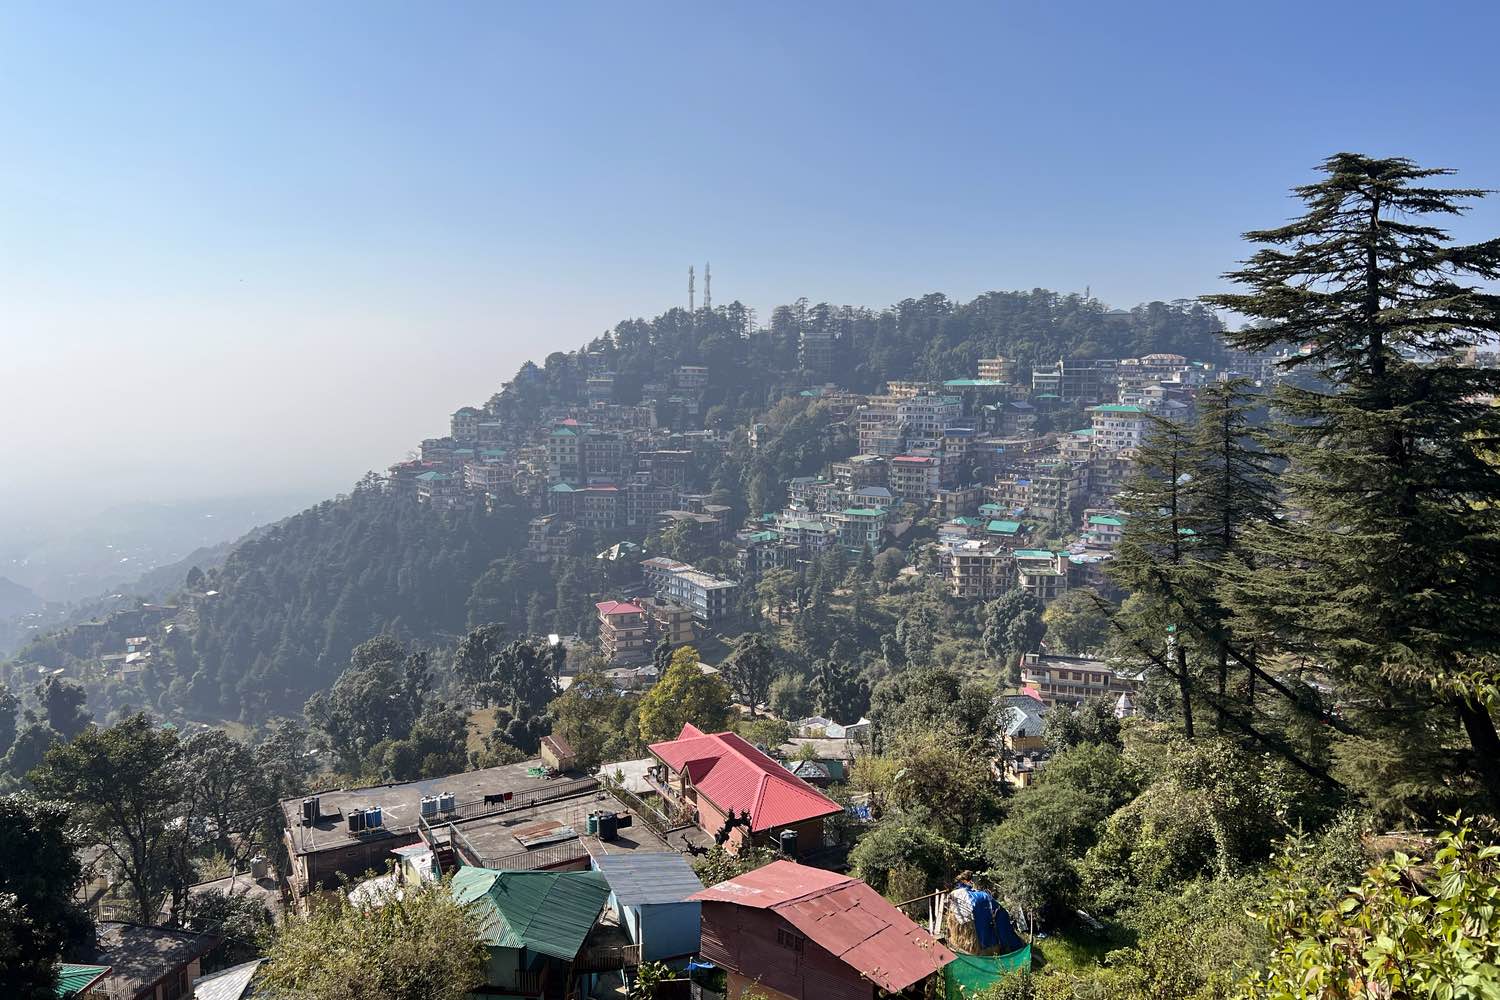 View of Dharamashala from the road to Mcleod Ganj.